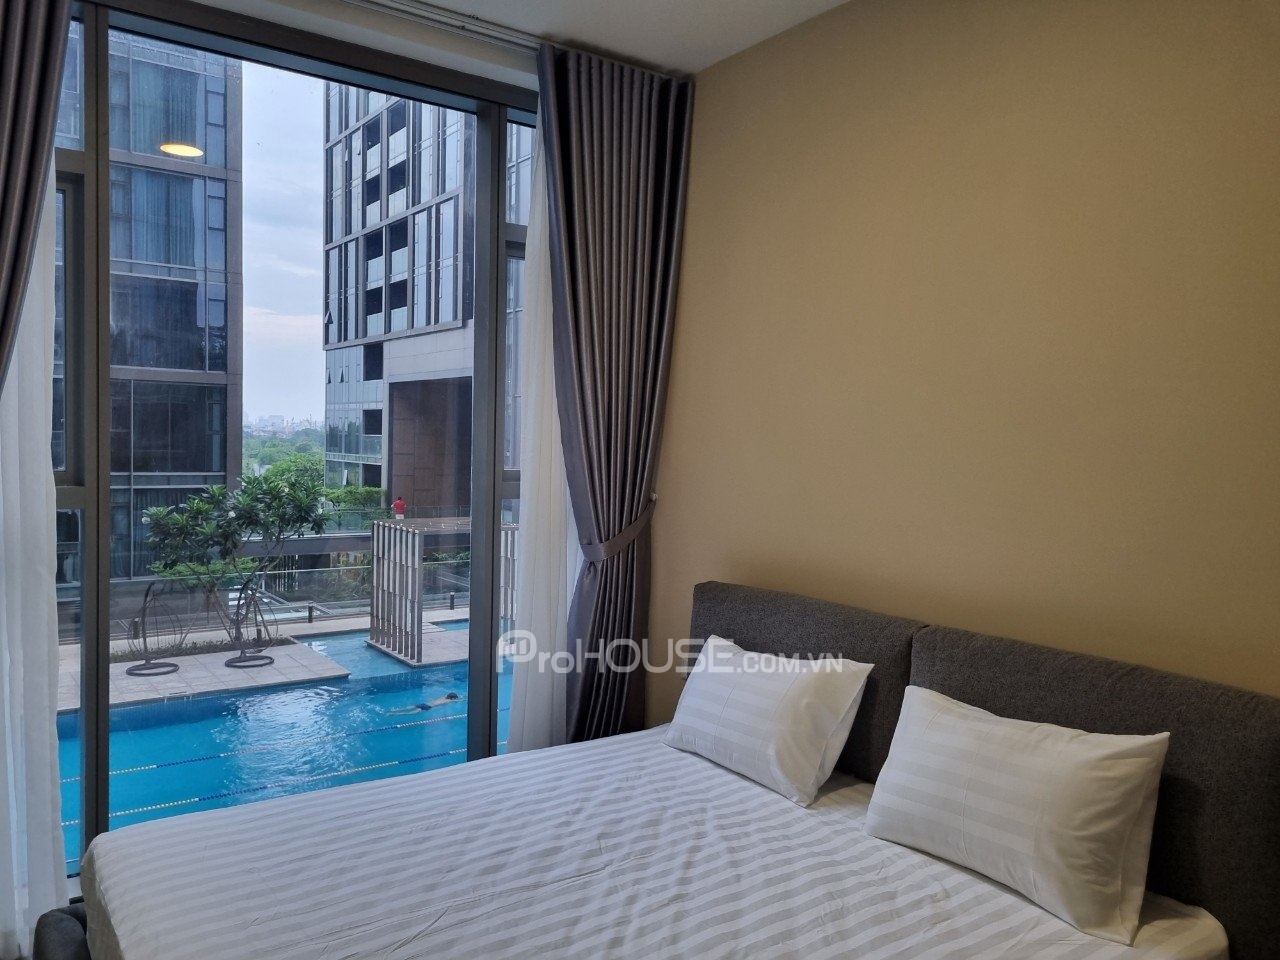 Pool view Empire City apartment for rent with 3 bedrooms